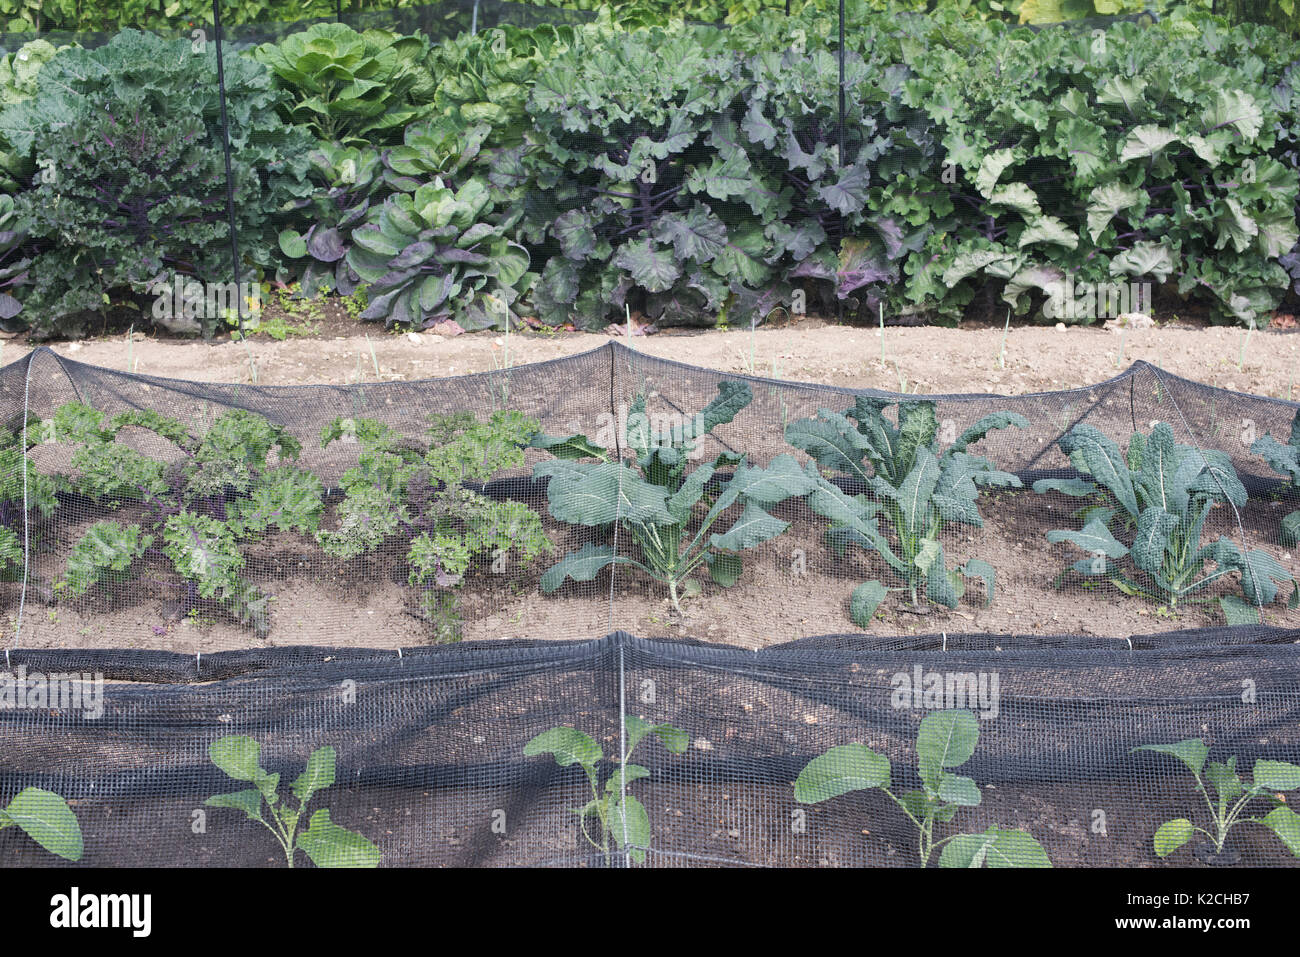 Brassica oleracea plants including Kale and cabbage growing under netting in an english vegetable garden. UK Stock Photo